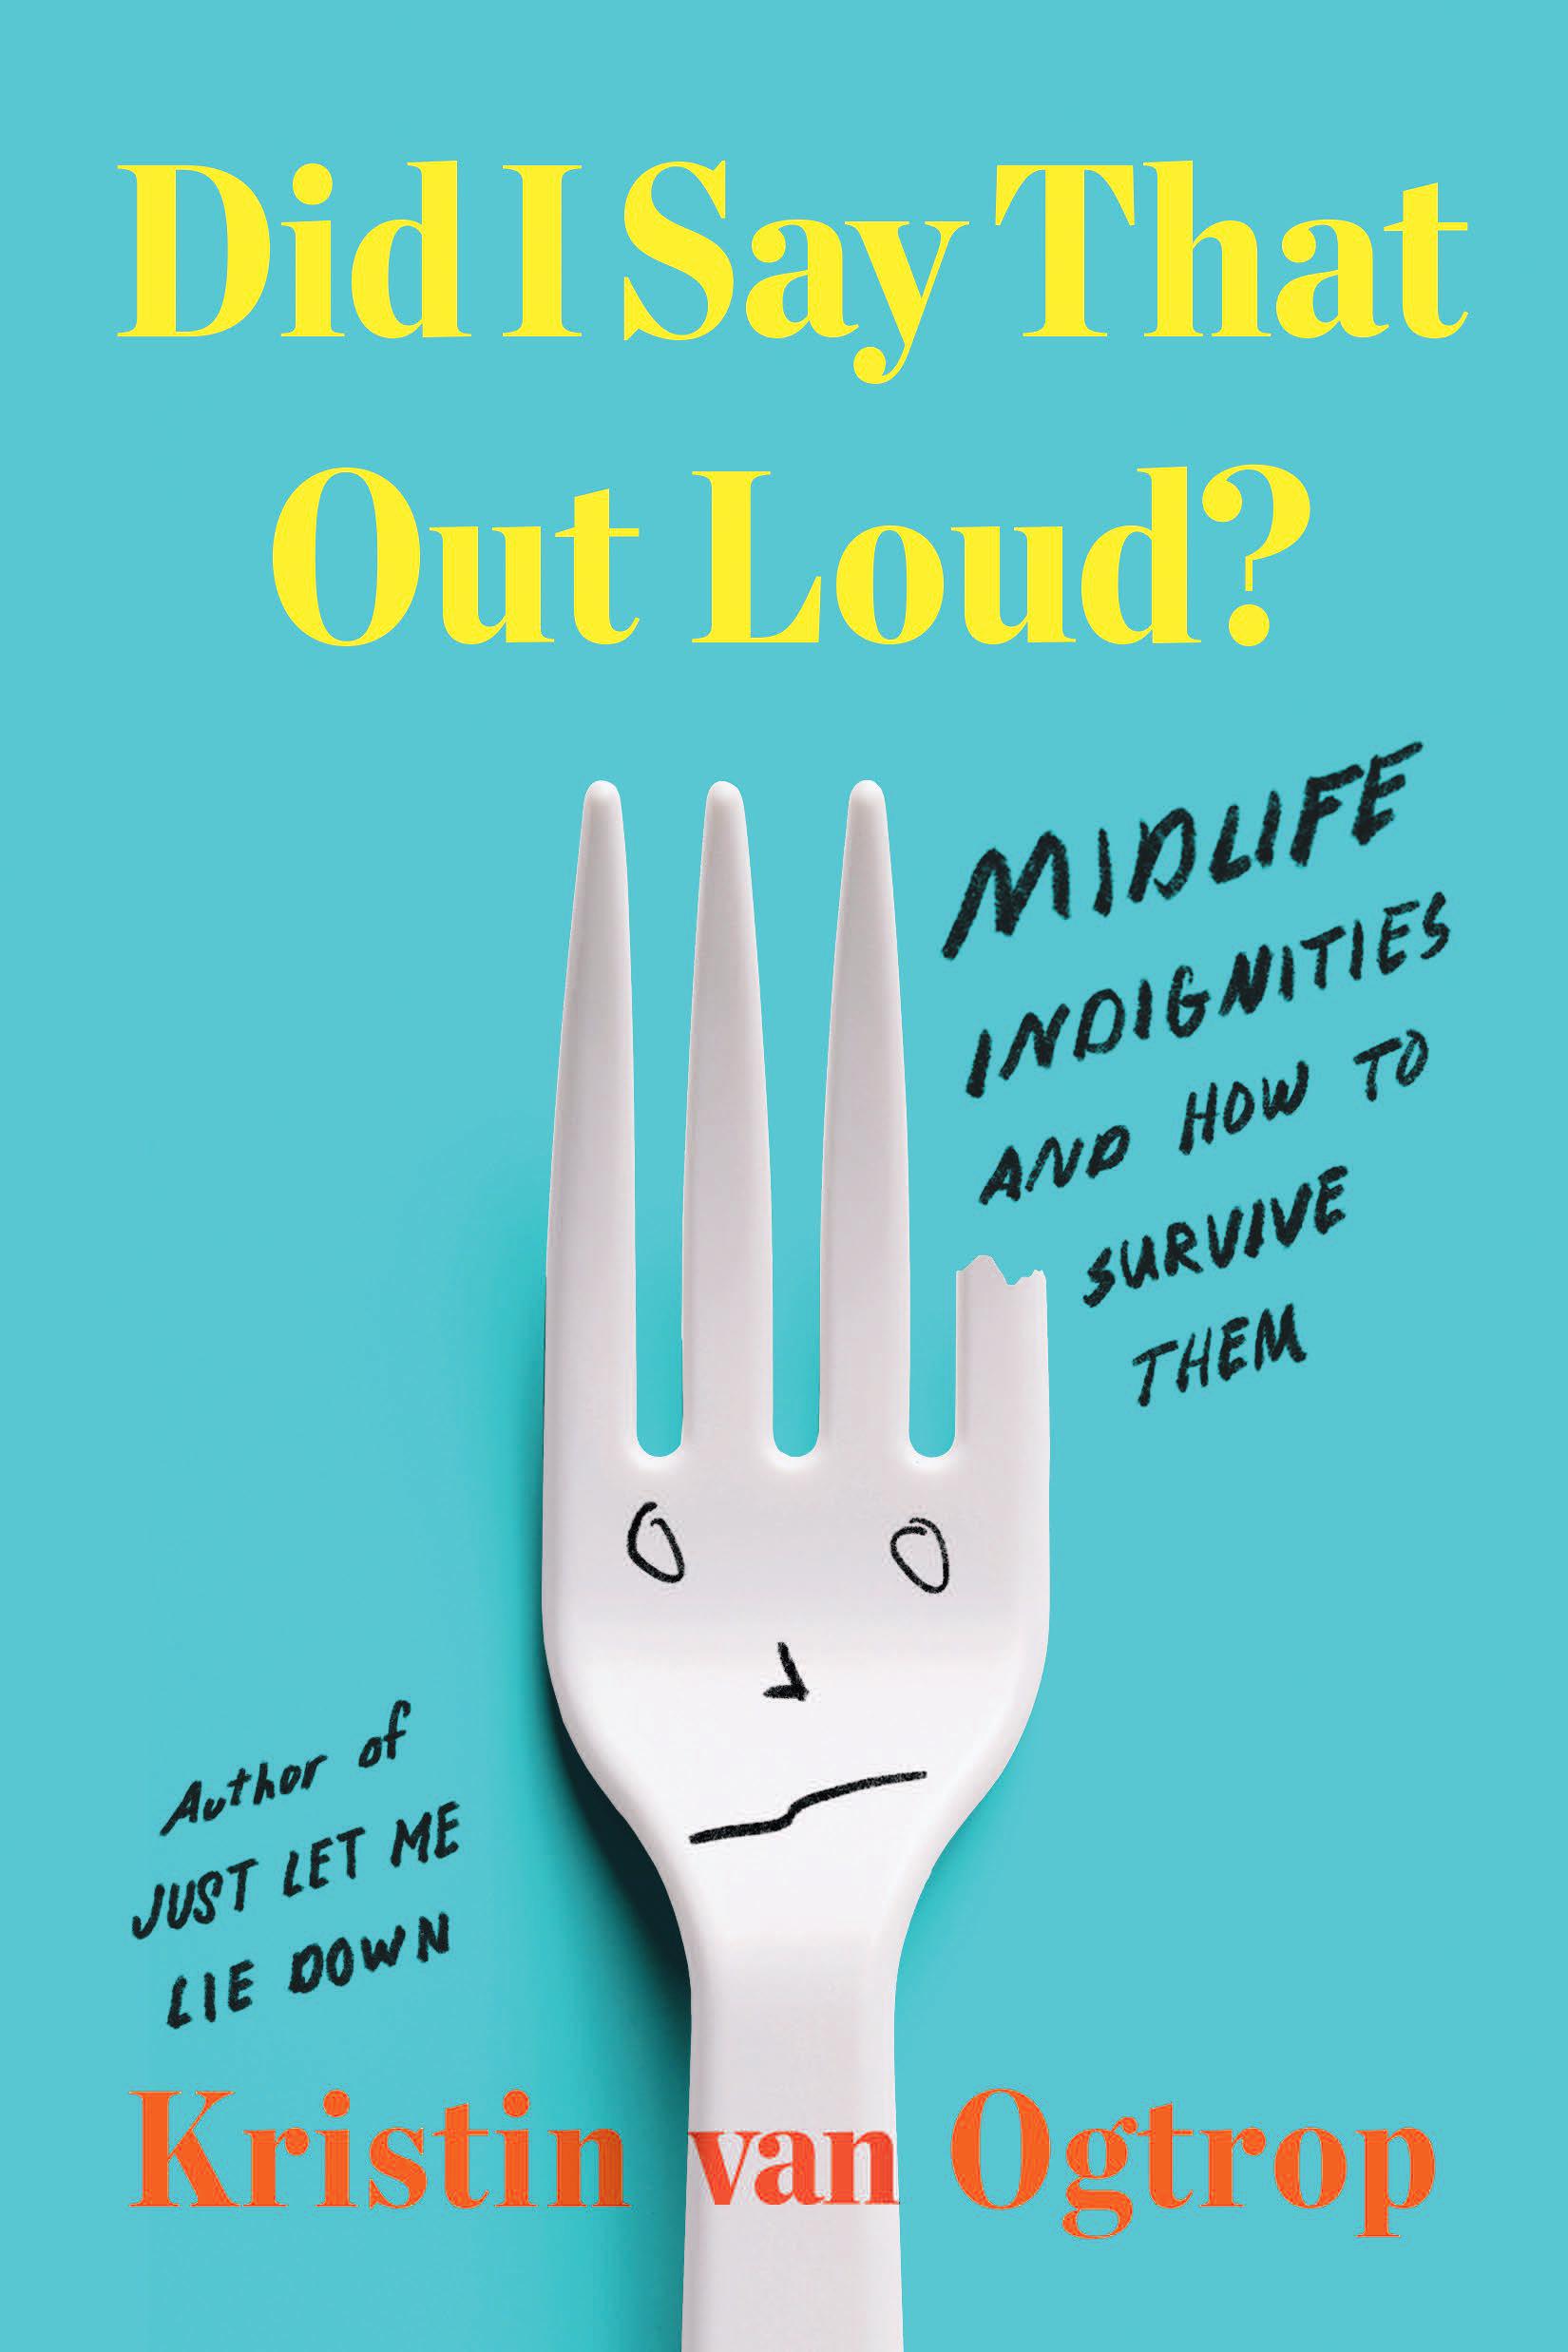 DID I SAY THAT OUT LOUD? MIDLIFE INDIGNITIES AND HOW TO SURVIVE THEM BY KRISTIN VAN OGTROP